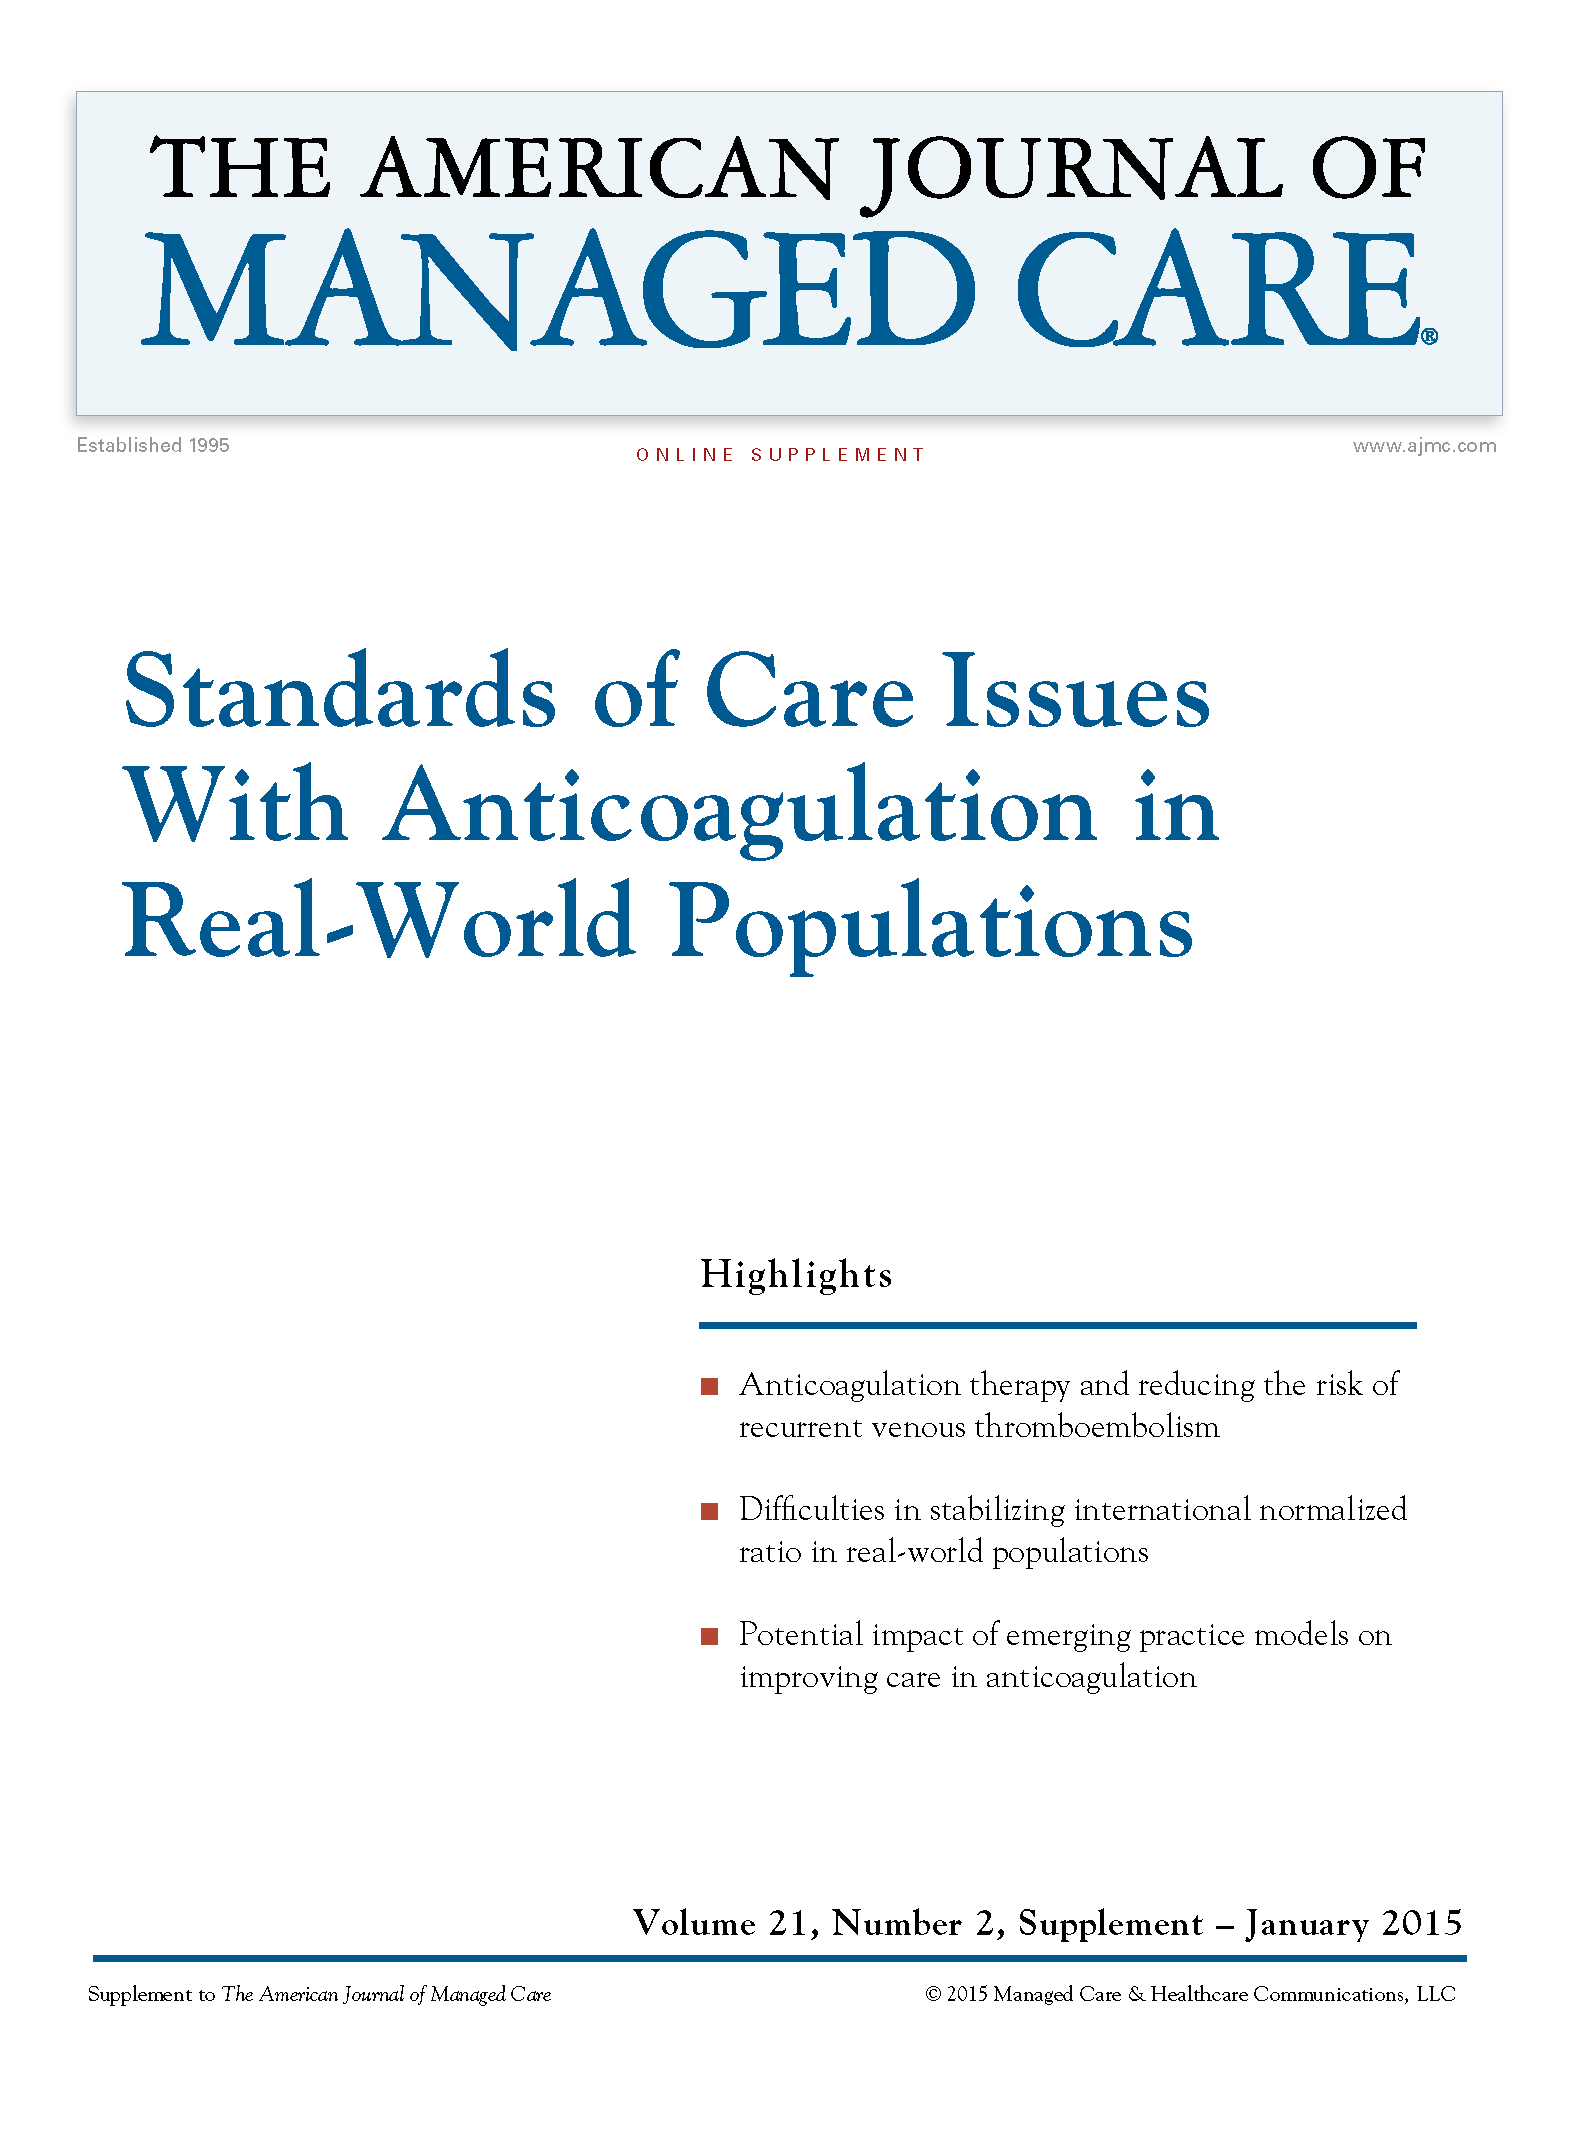 Standards of Care Issues With Anticoagulation in Real-World Populations